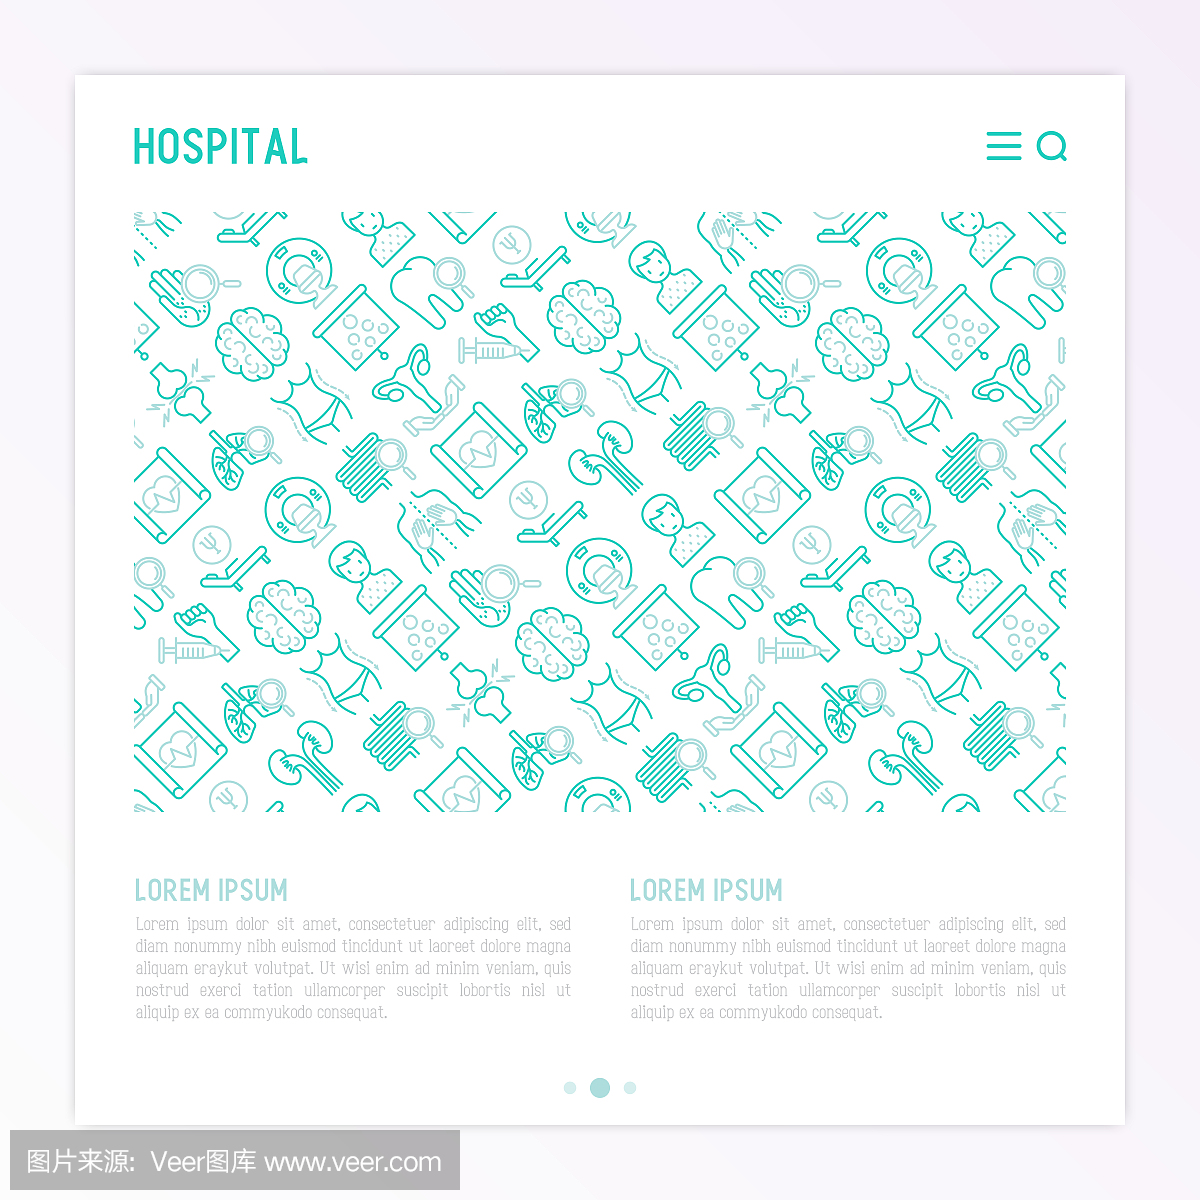 Hospital concept with thin line icons for doctor's